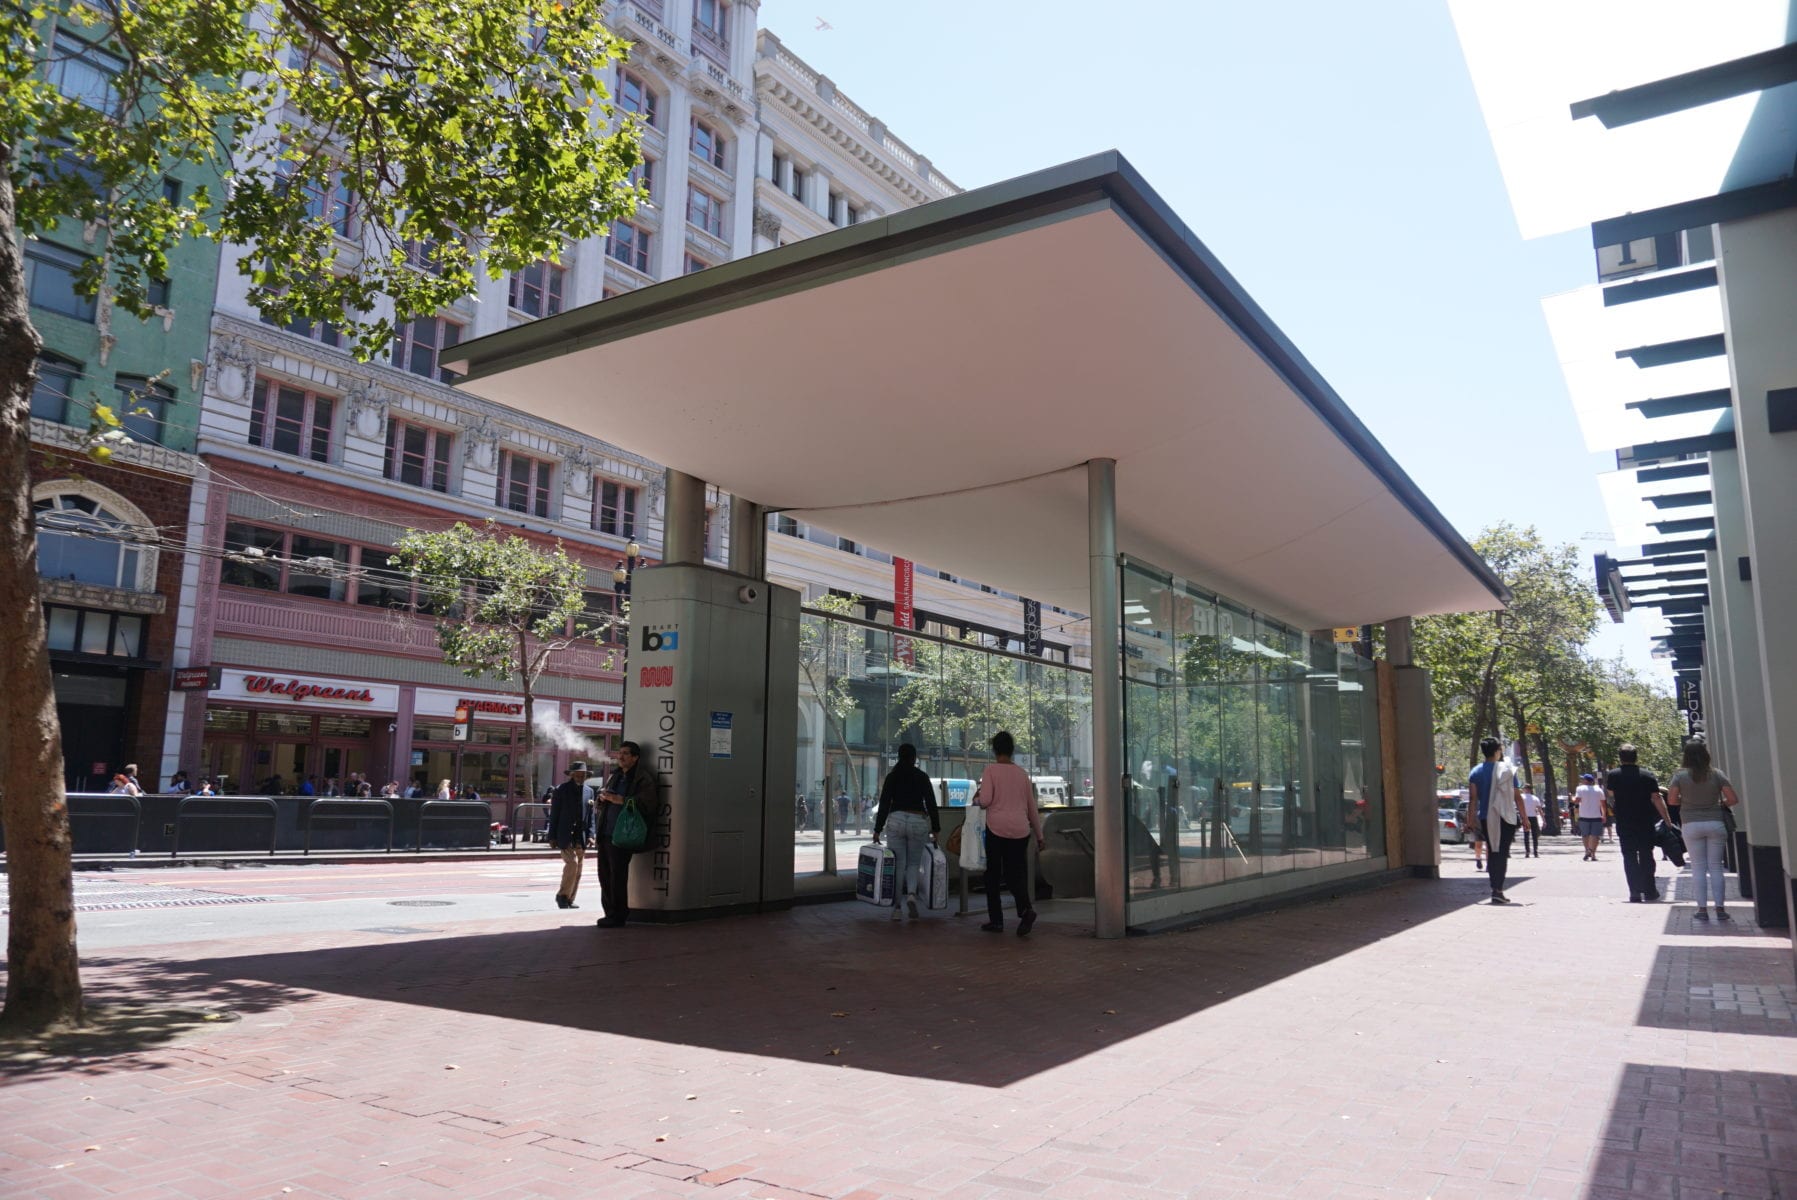 BART Canopies at Powell Street Station - Fast + Epp